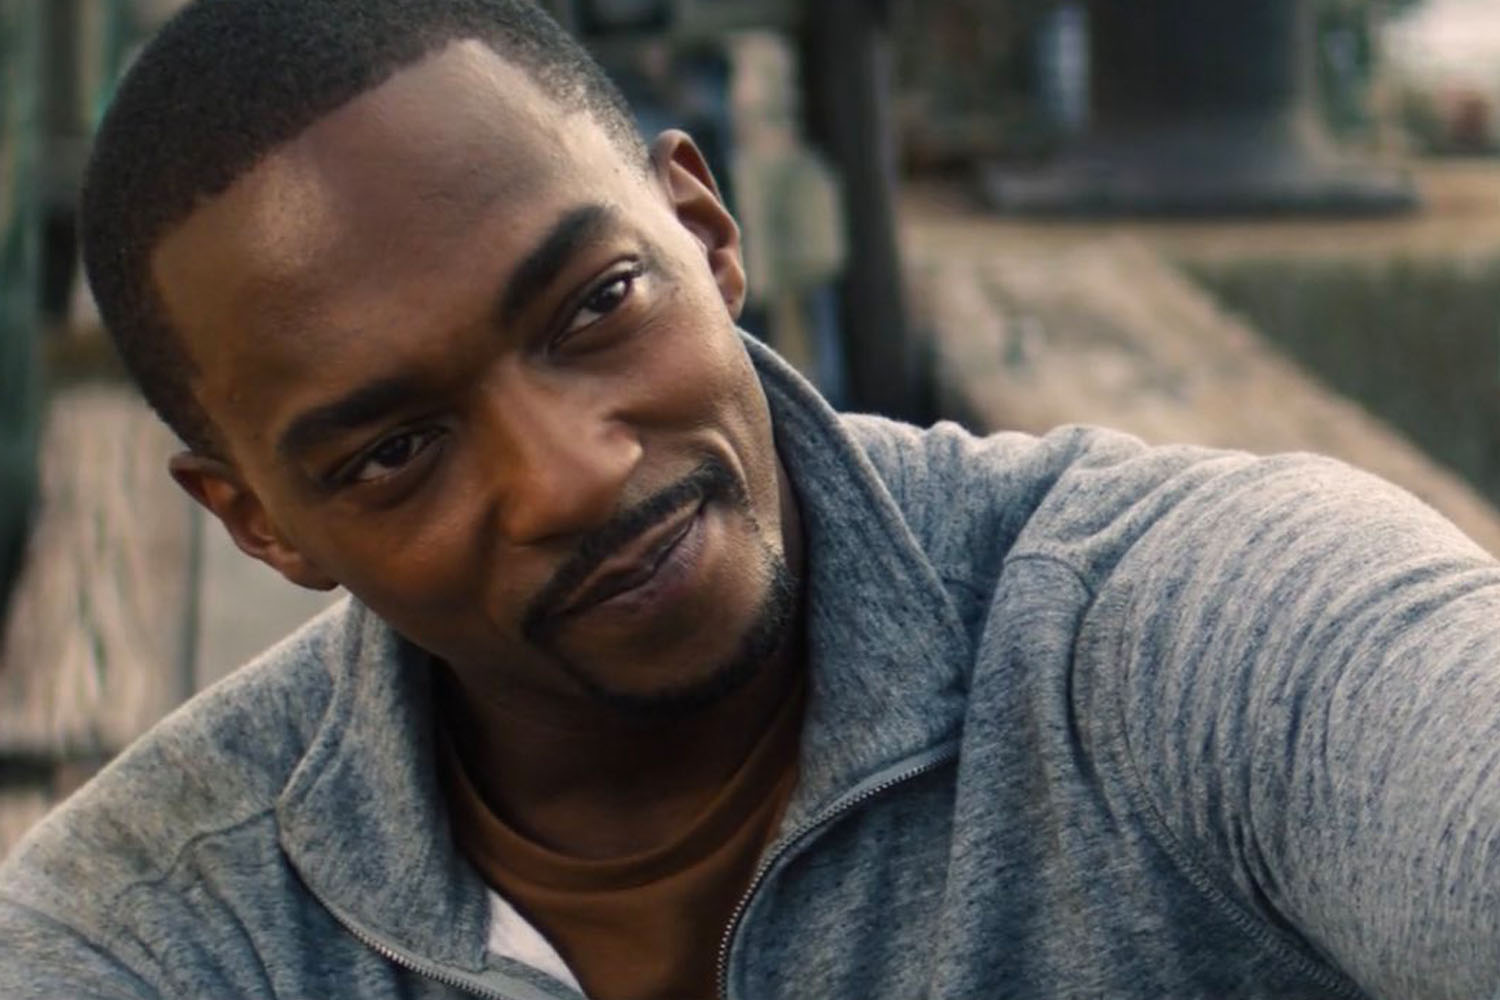 'The Falcon and the Winter Soldier' Episode 5 gives Sam Wilson his best scenes of the show